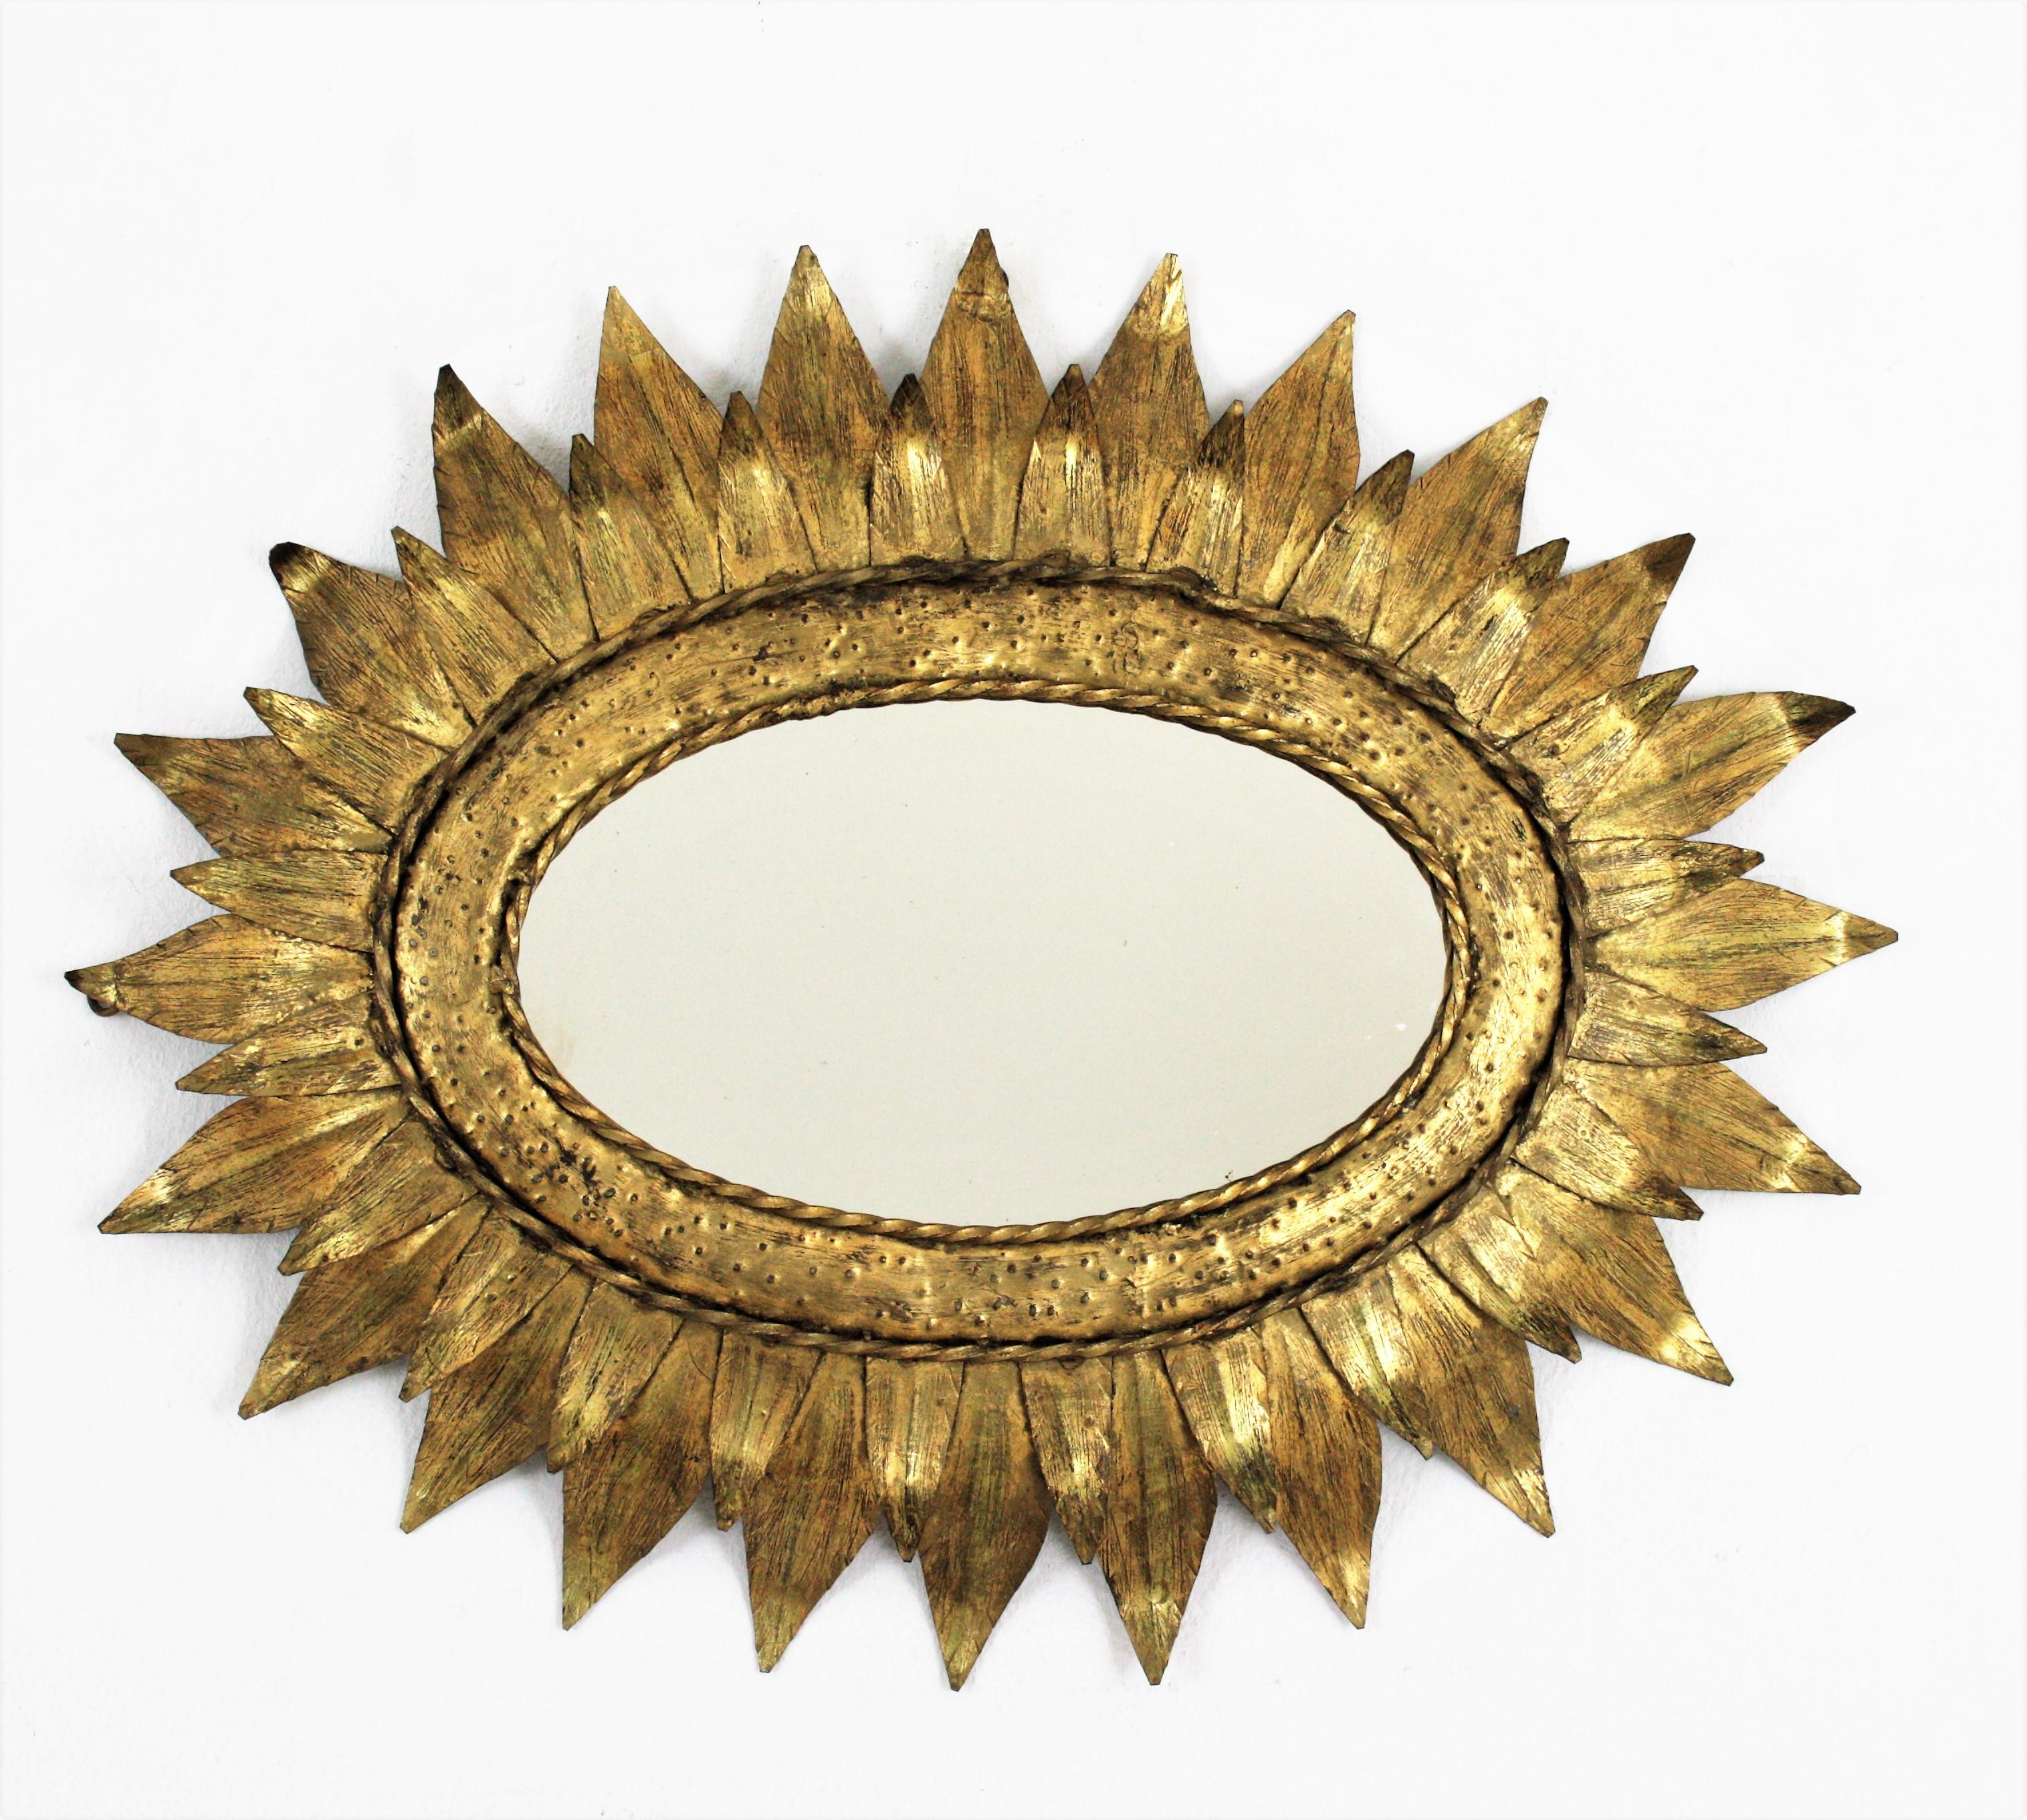 French Sunburst Oval Mirror in Gilt Metal with Double Leafed Frame, 1950s
Oval sunburst mirror, Gilt iron. France, 1950s
______
This hand-hammered iron sunburst wall mirror features a double leafed oval frame heavily adorned by the hammer marks at